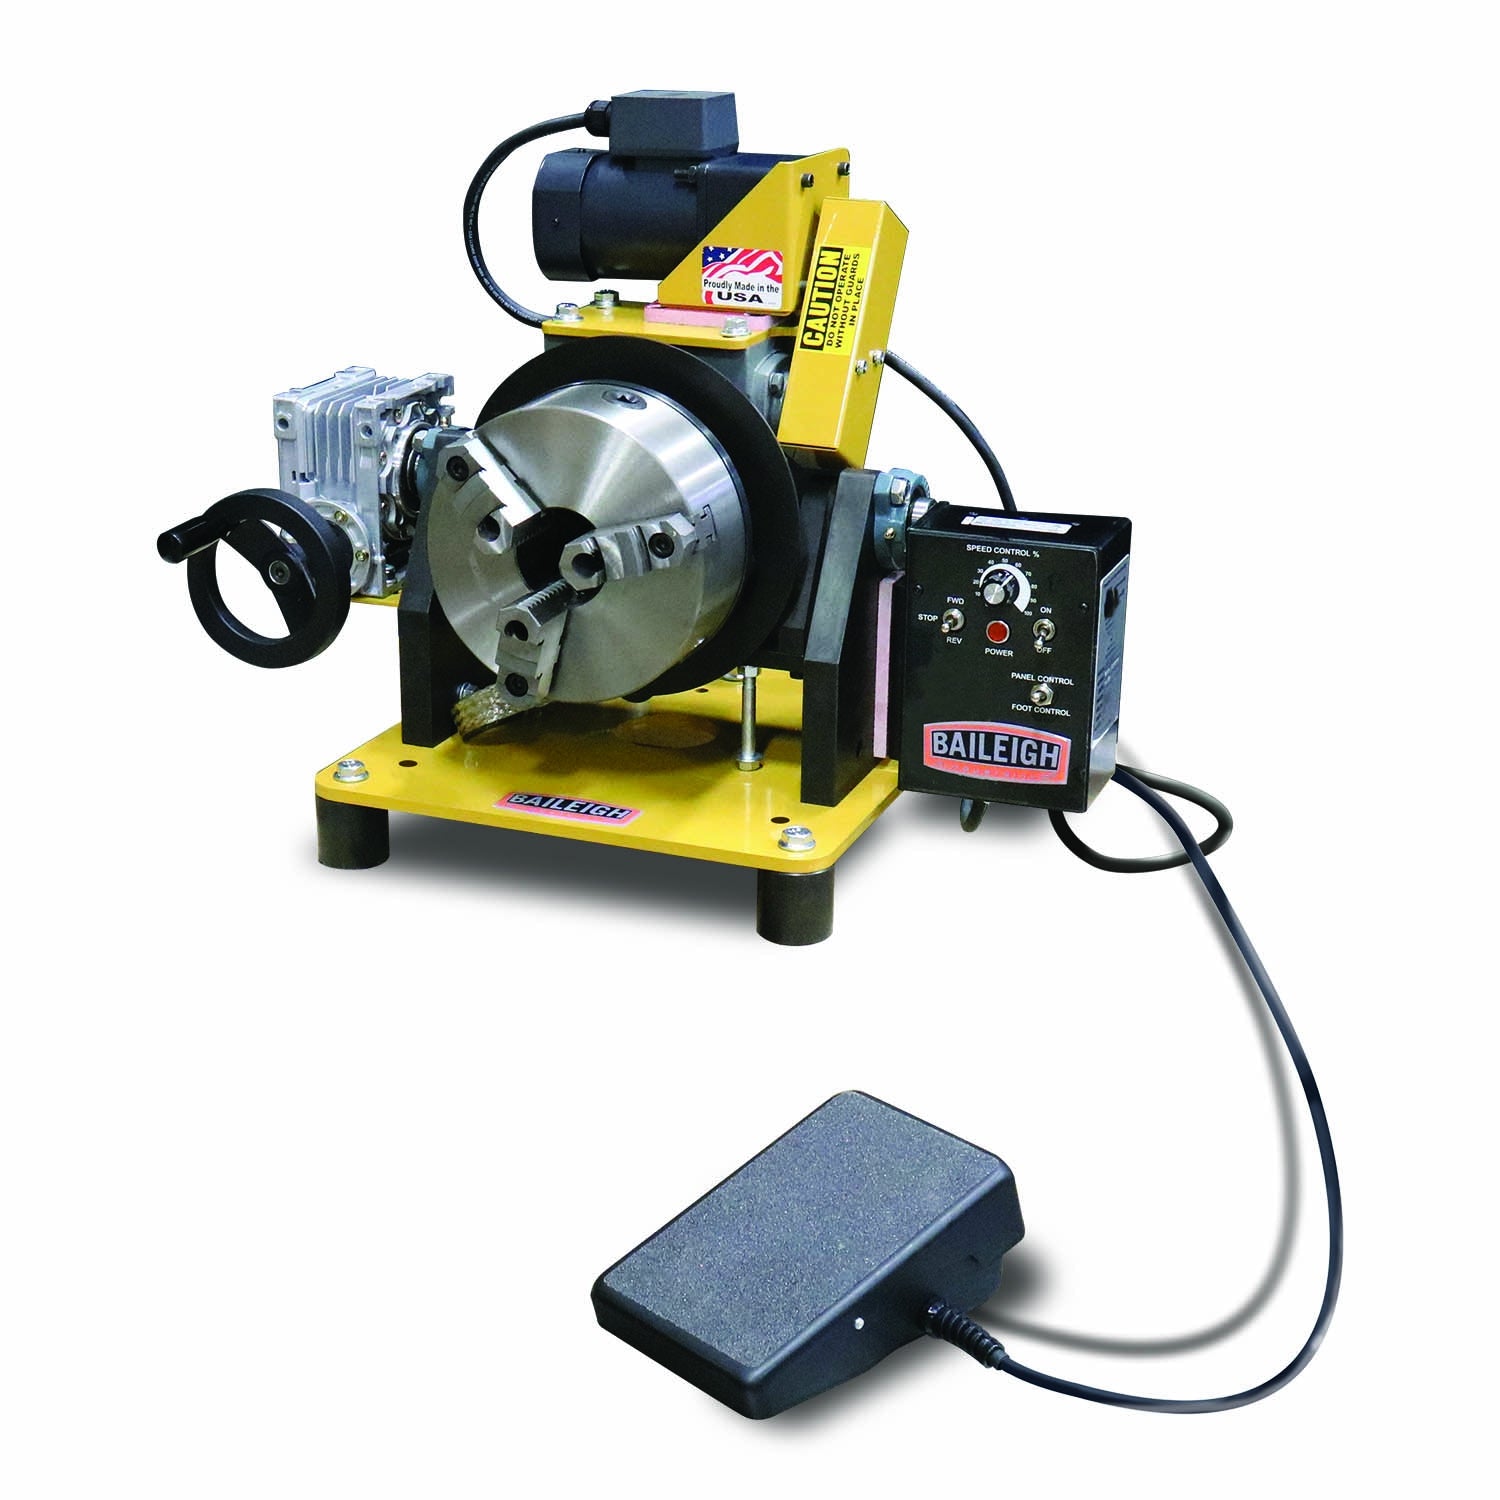 Baileigh WP-1800B Benchtop Welding Positioner, 8" 3-jaw chuck with 2-3/8" Through Hole